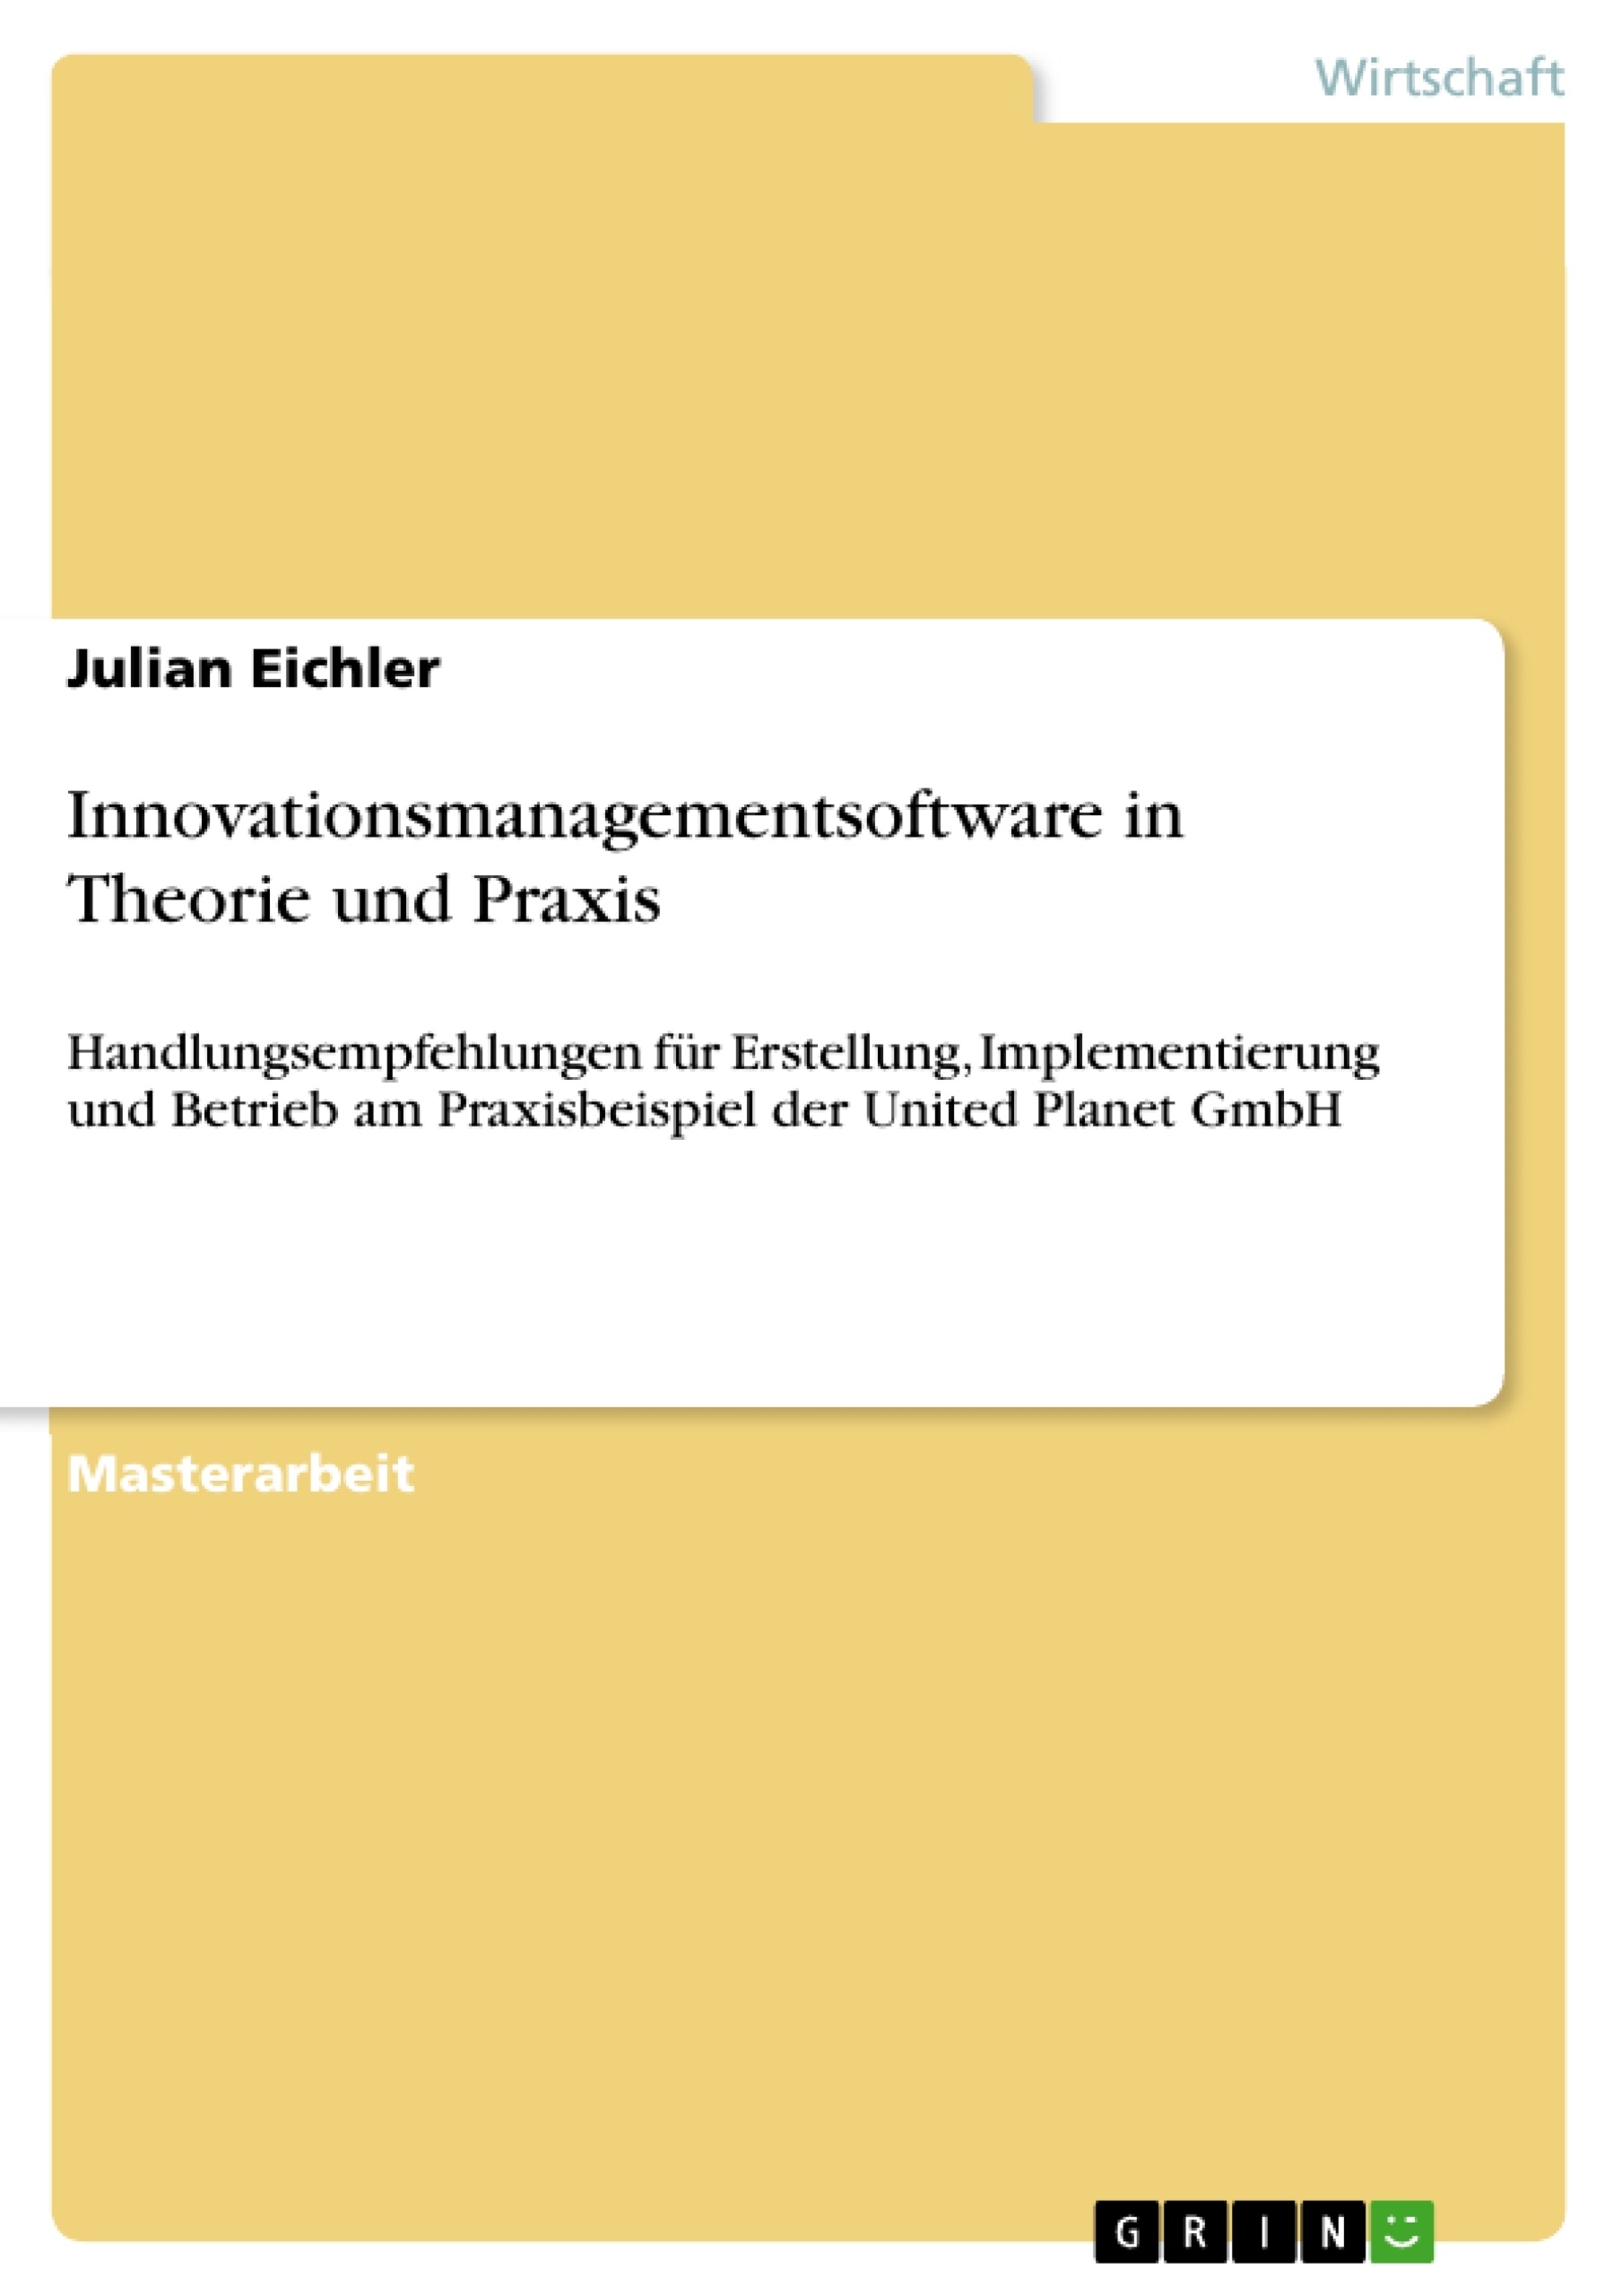 Título: Innovationsmanagementsoftware in Theorie und Praxis